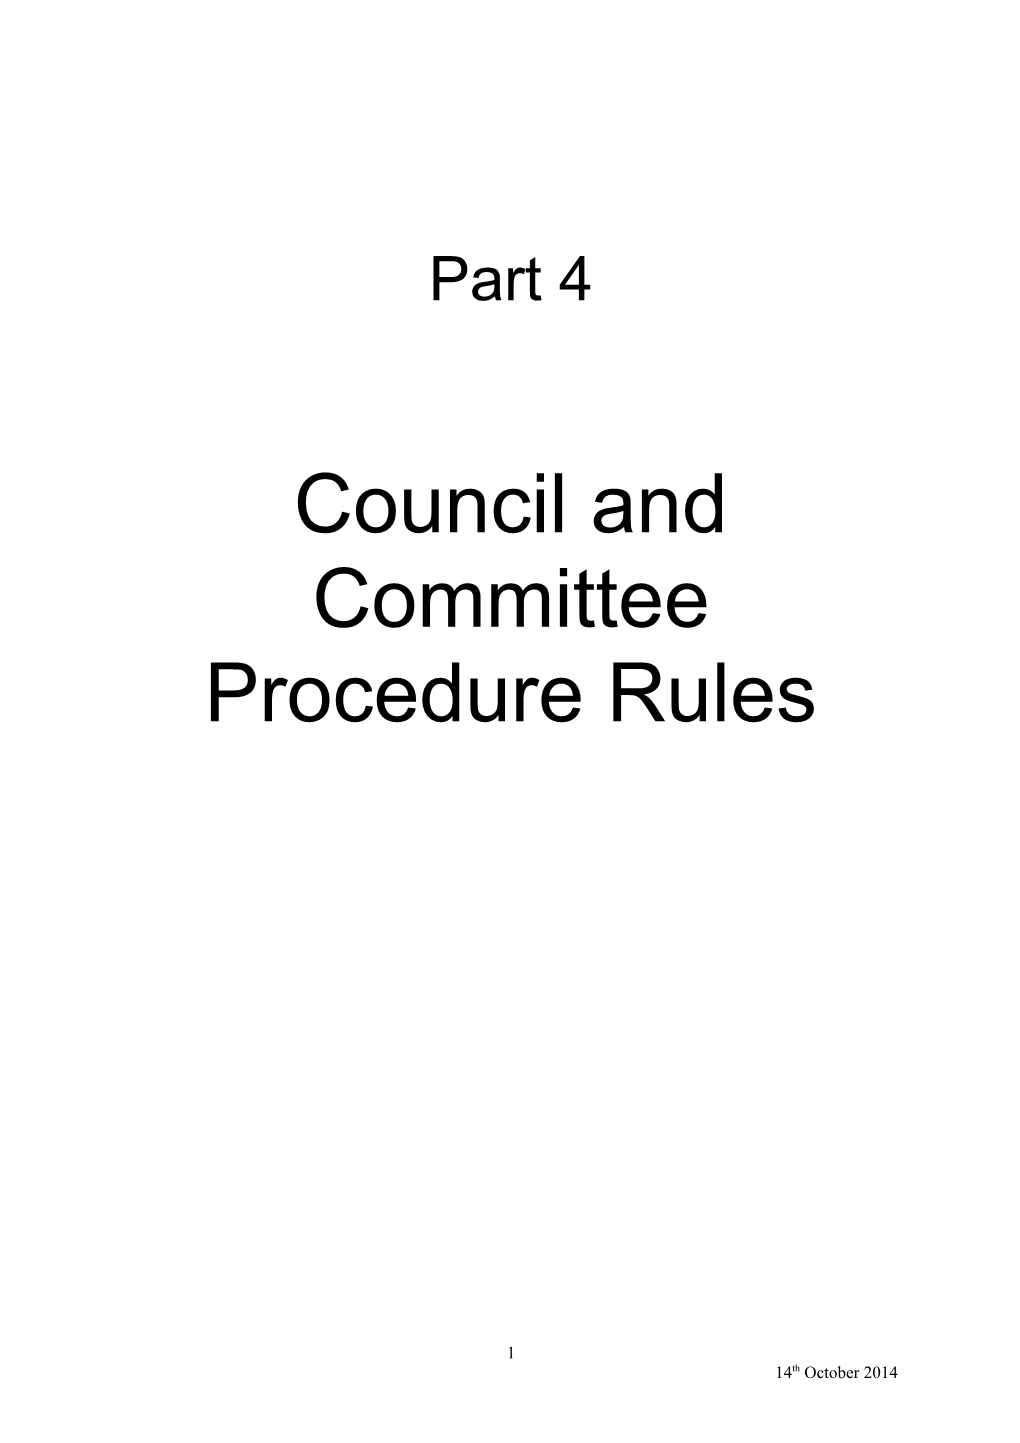 Council and Committee Procedure Rules